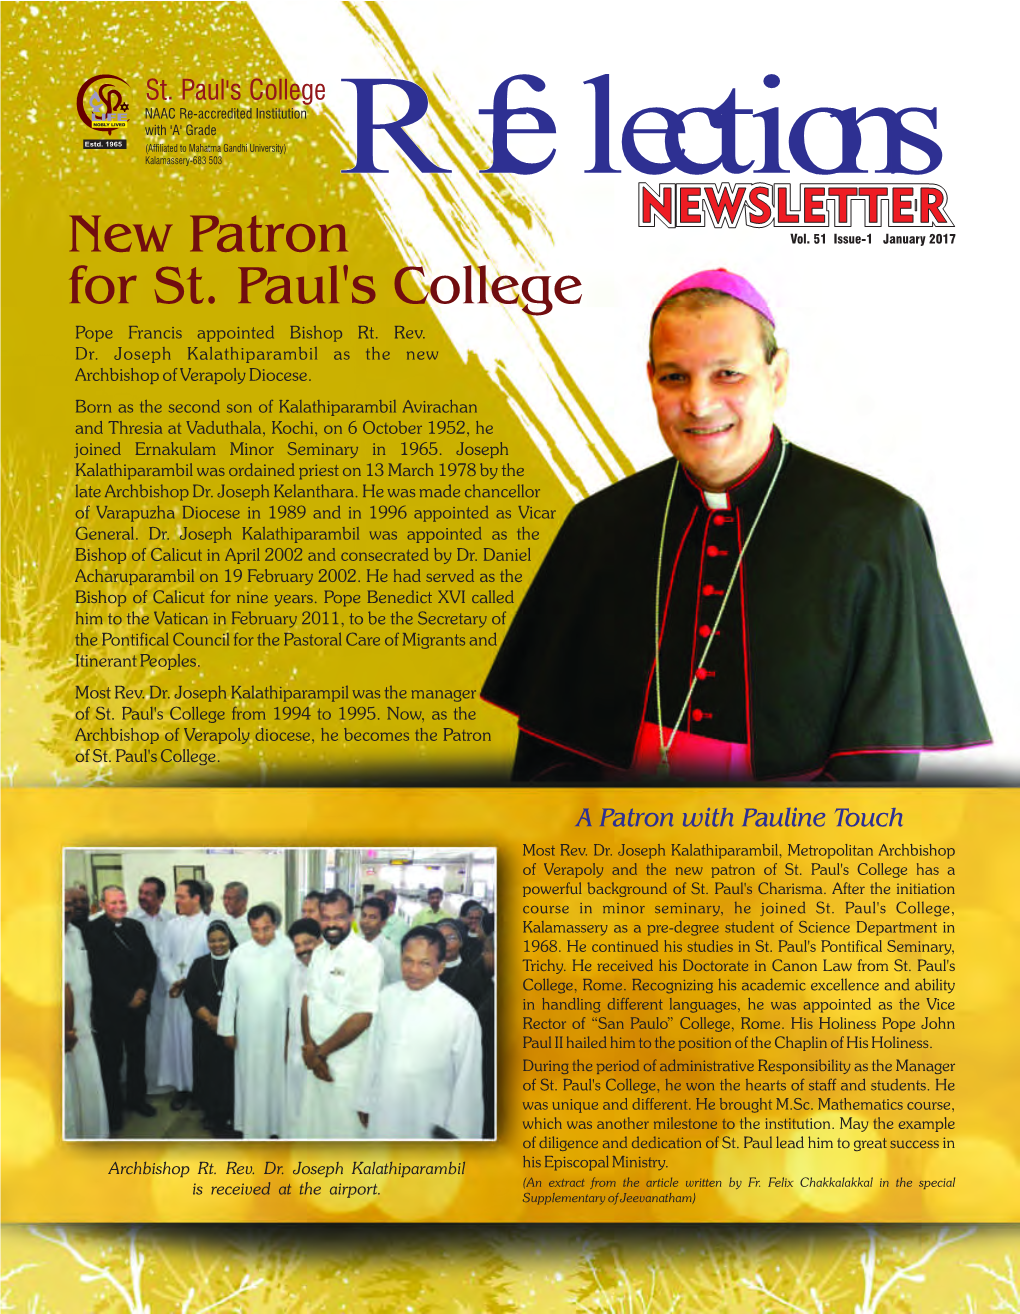 New Patron for St. Paul's College